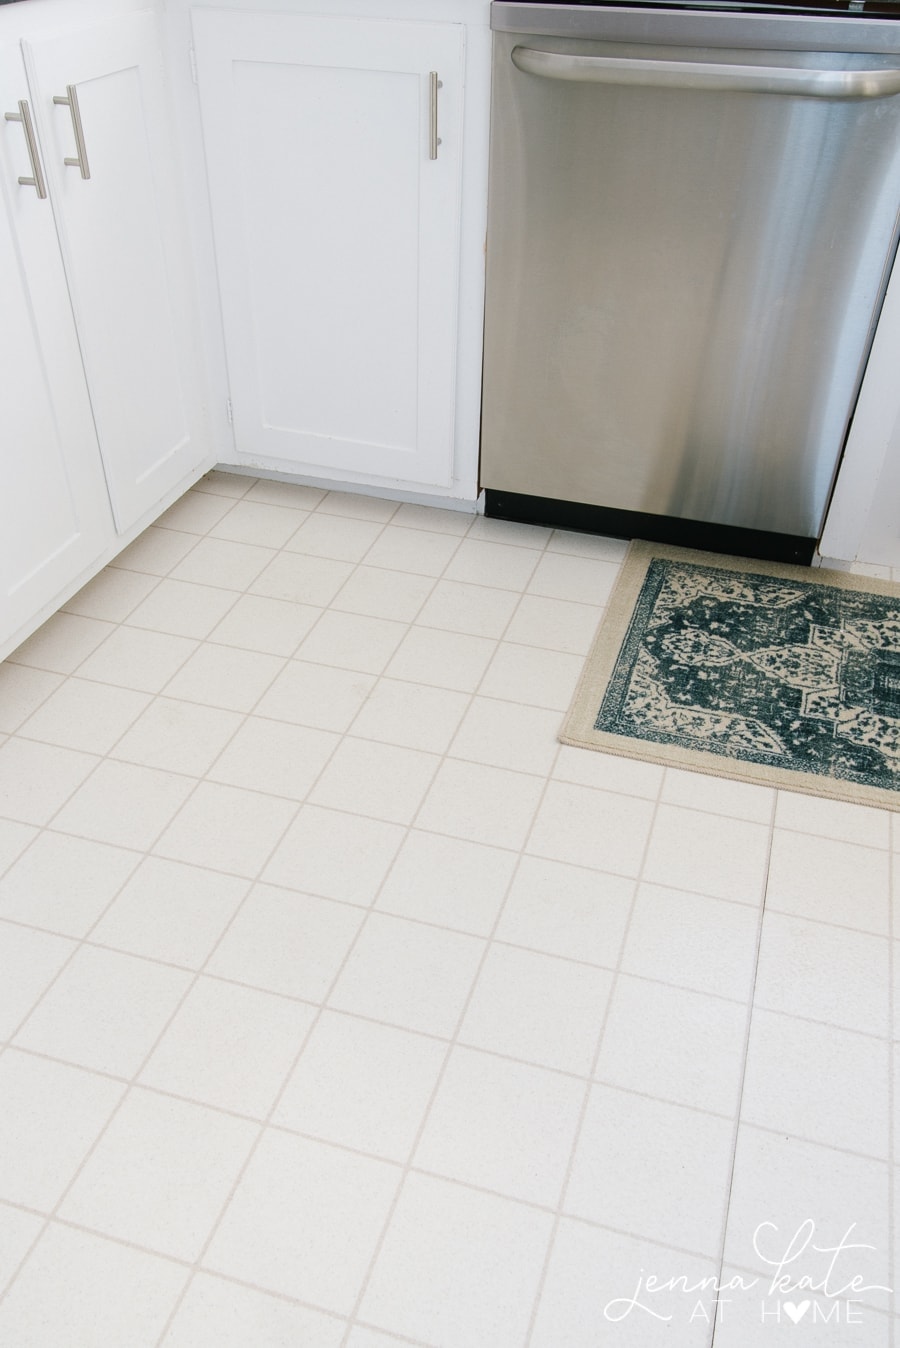 The white tile floor of a kitchen, with a blue and white rug near the dishwasher/sink area